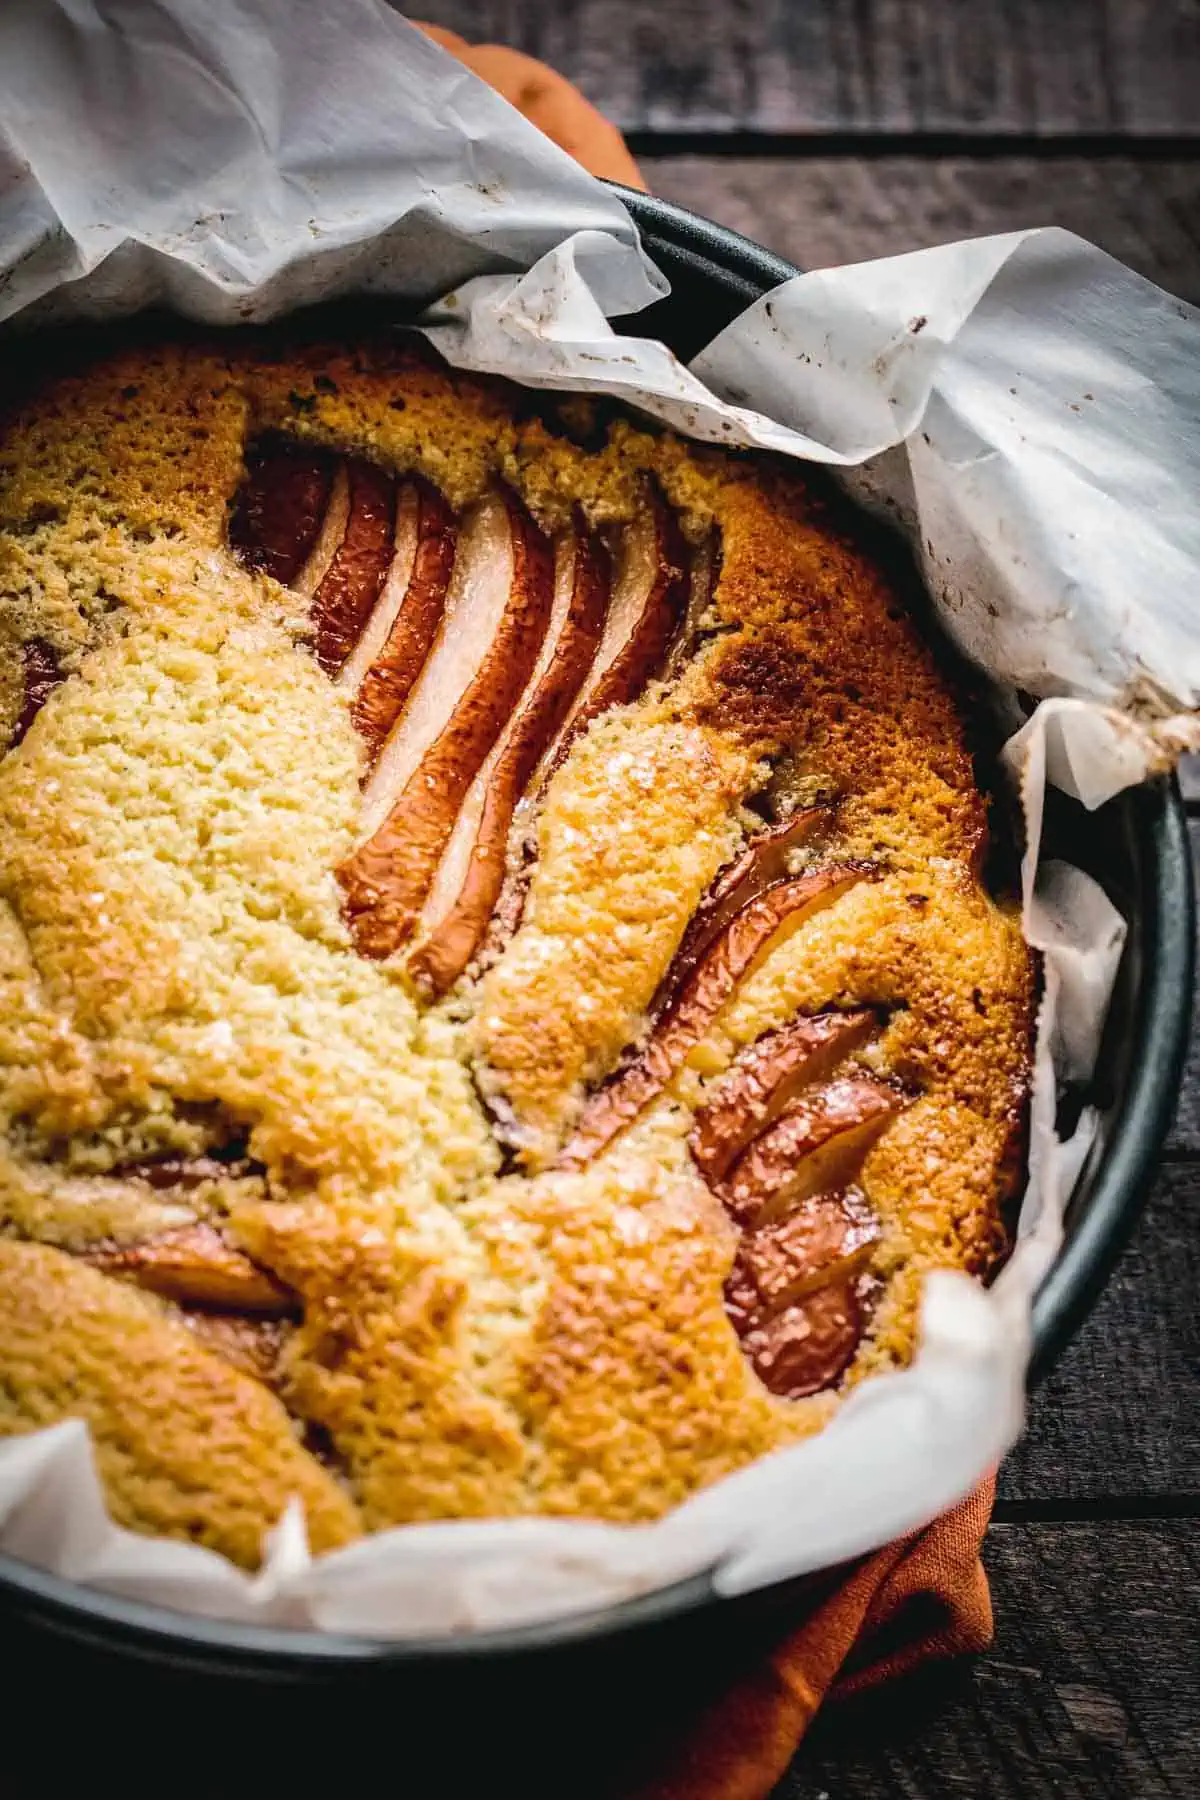 A baked pear ricotta cake in a parchment lined round cake pan.